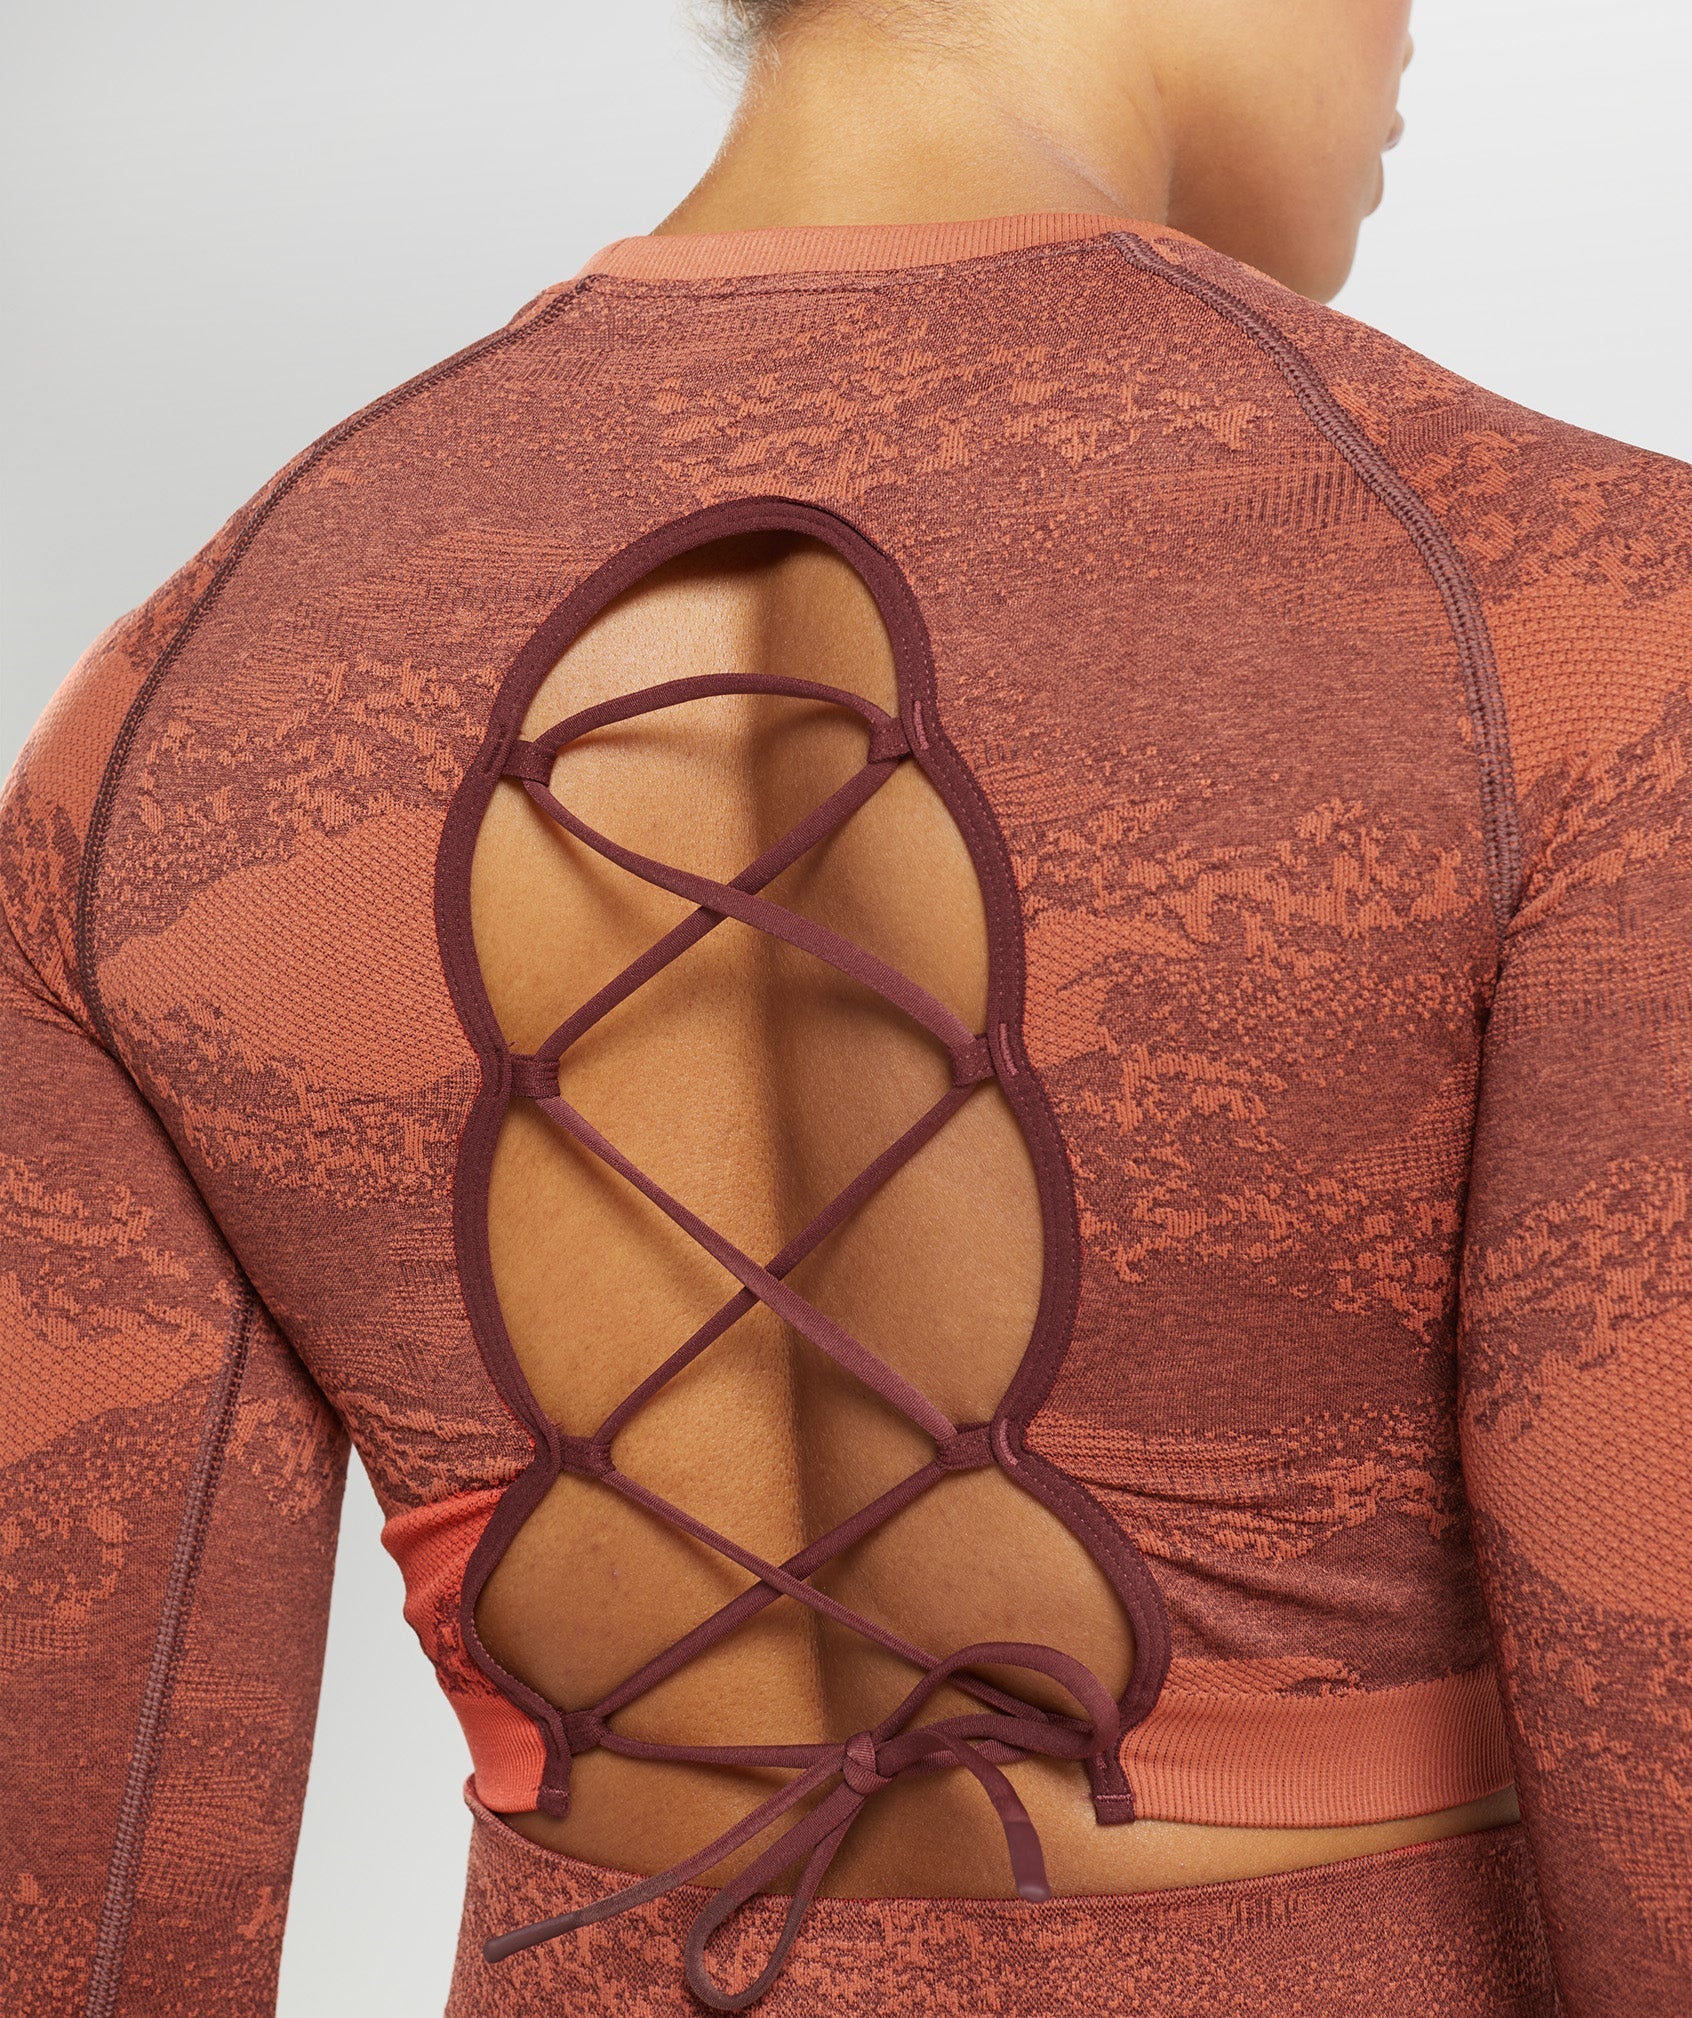 Adapt Camo Seamless Lace Up Back Top in Storm Red/Cherry Brown - view 5